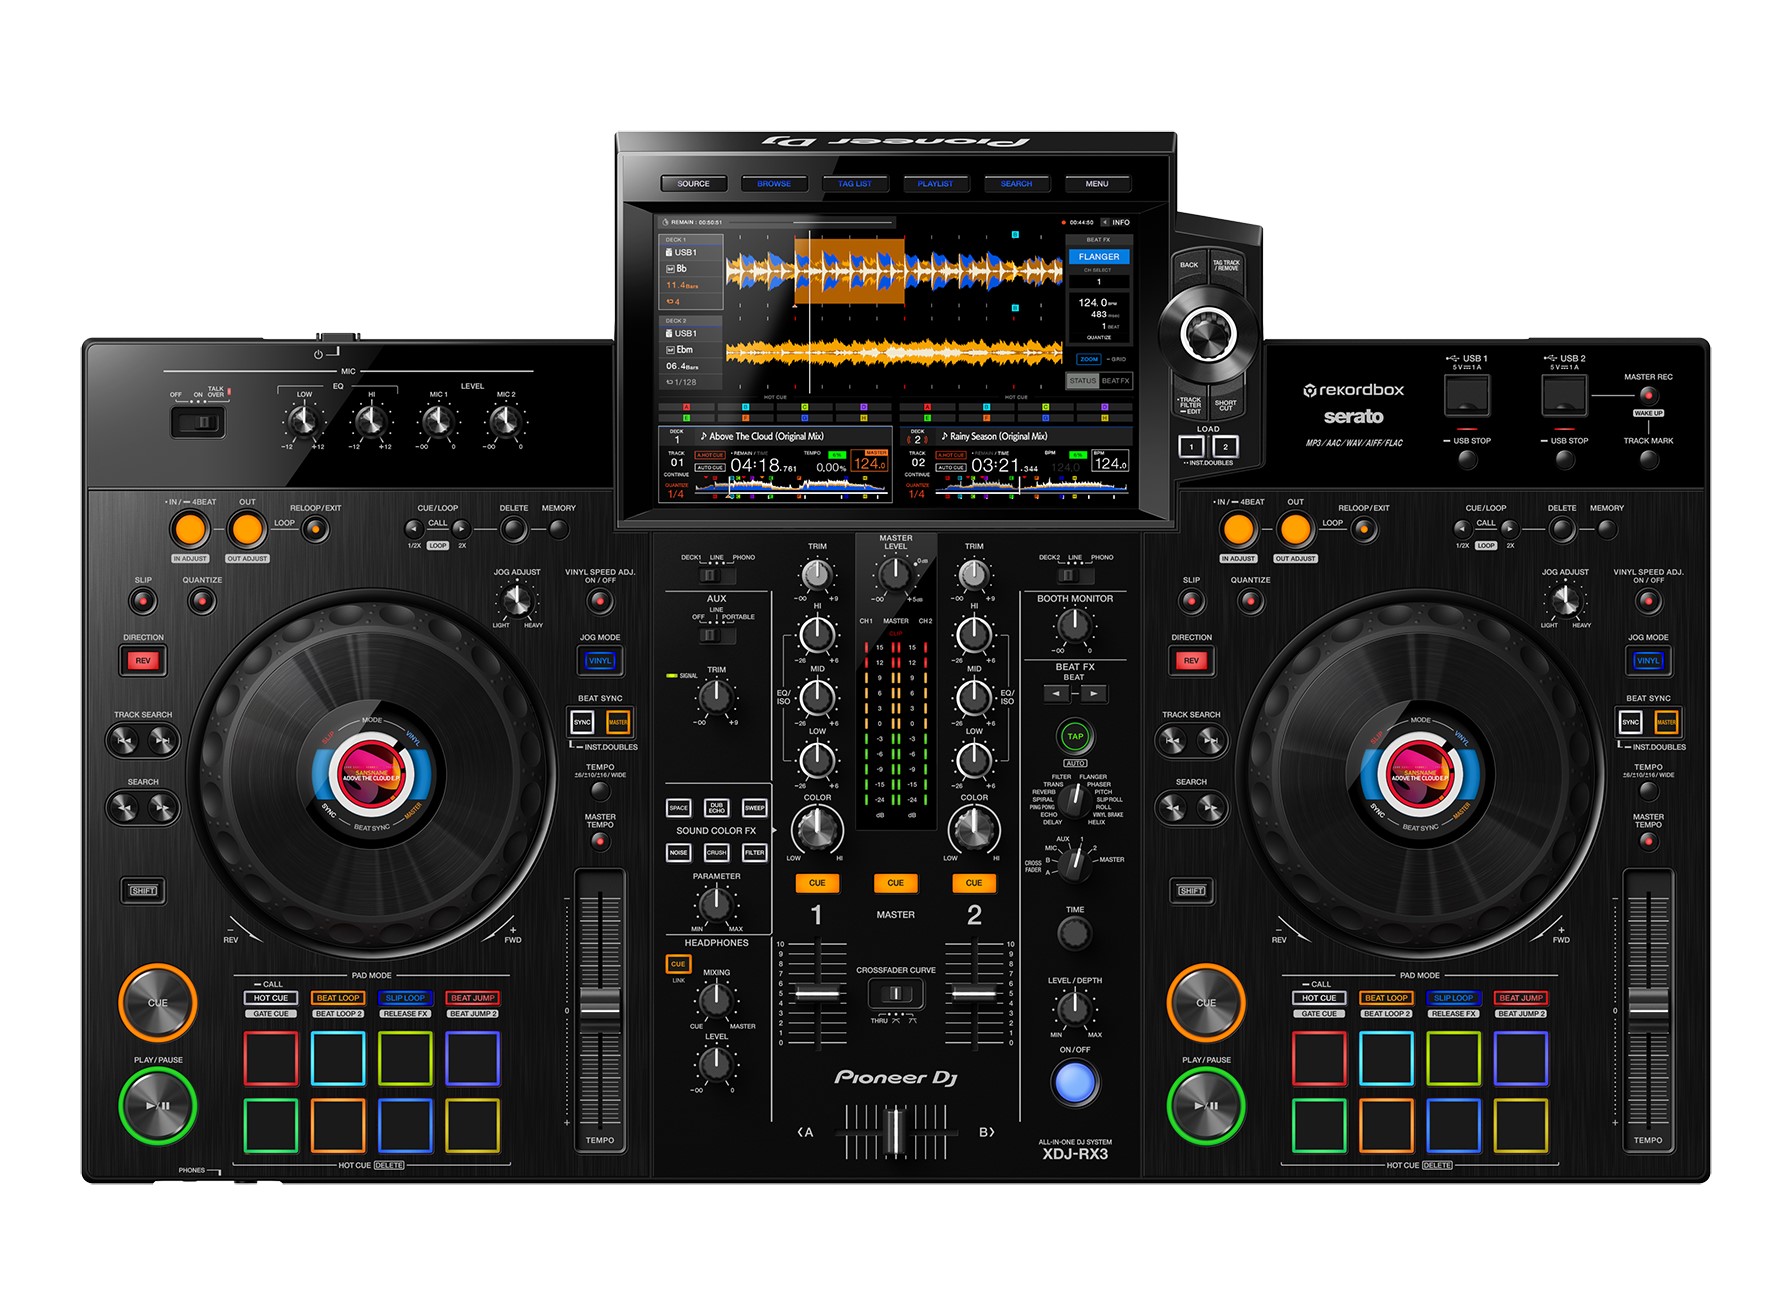 Pioneer DJ CDJ-3000: All specifications & features